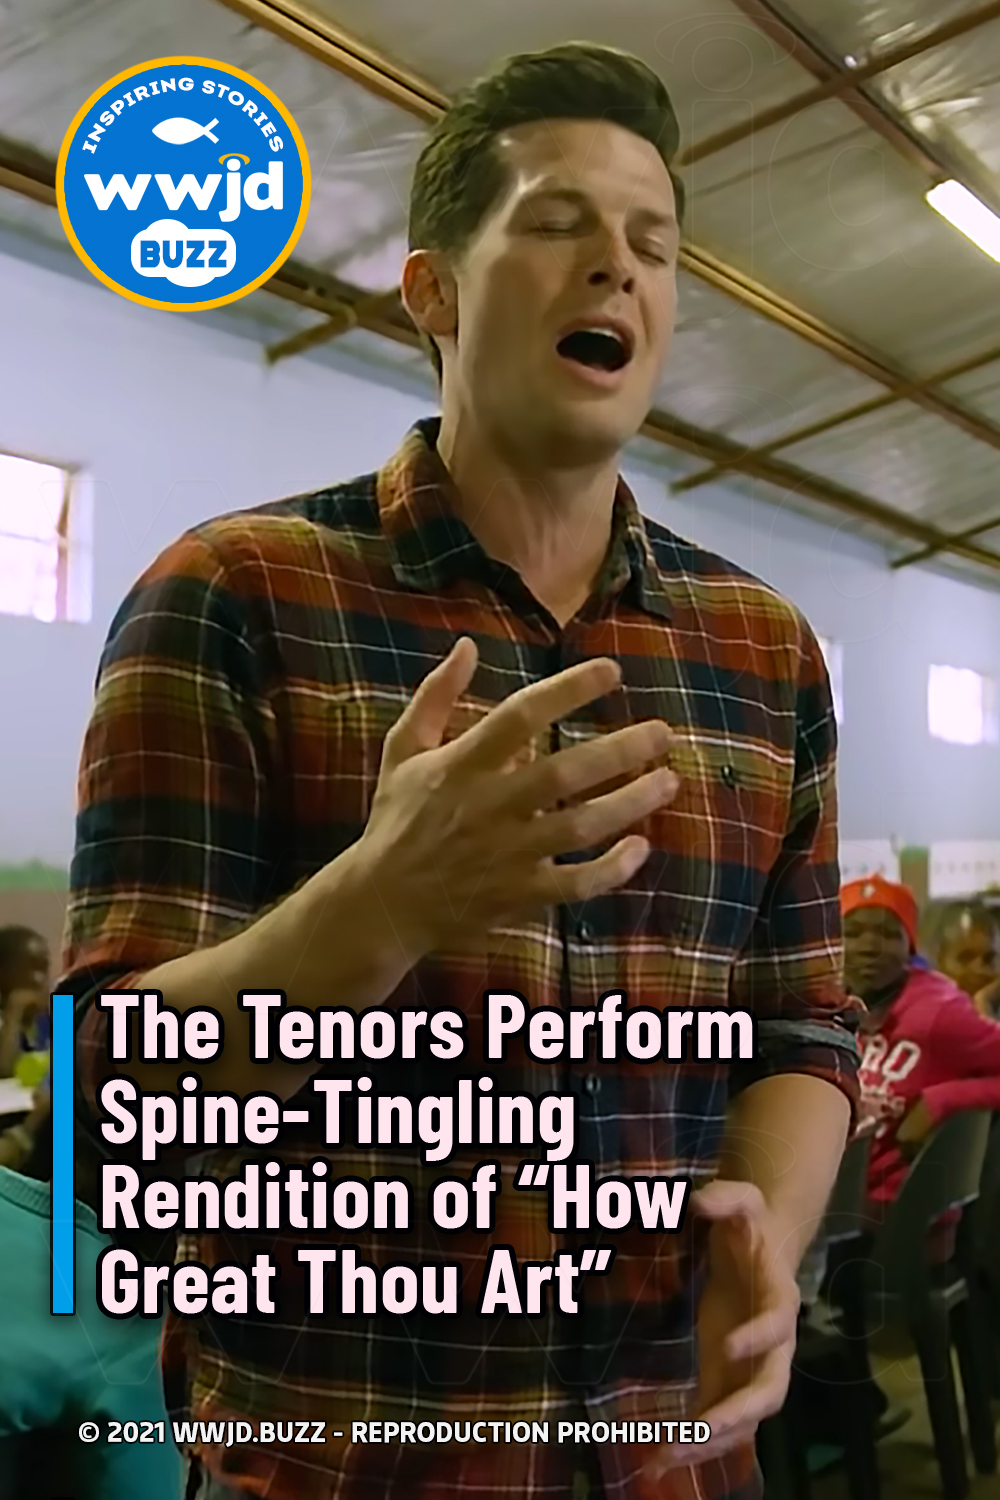 The Tenors Perform Spine-Tingling Rendition of “How Great Thou Art”